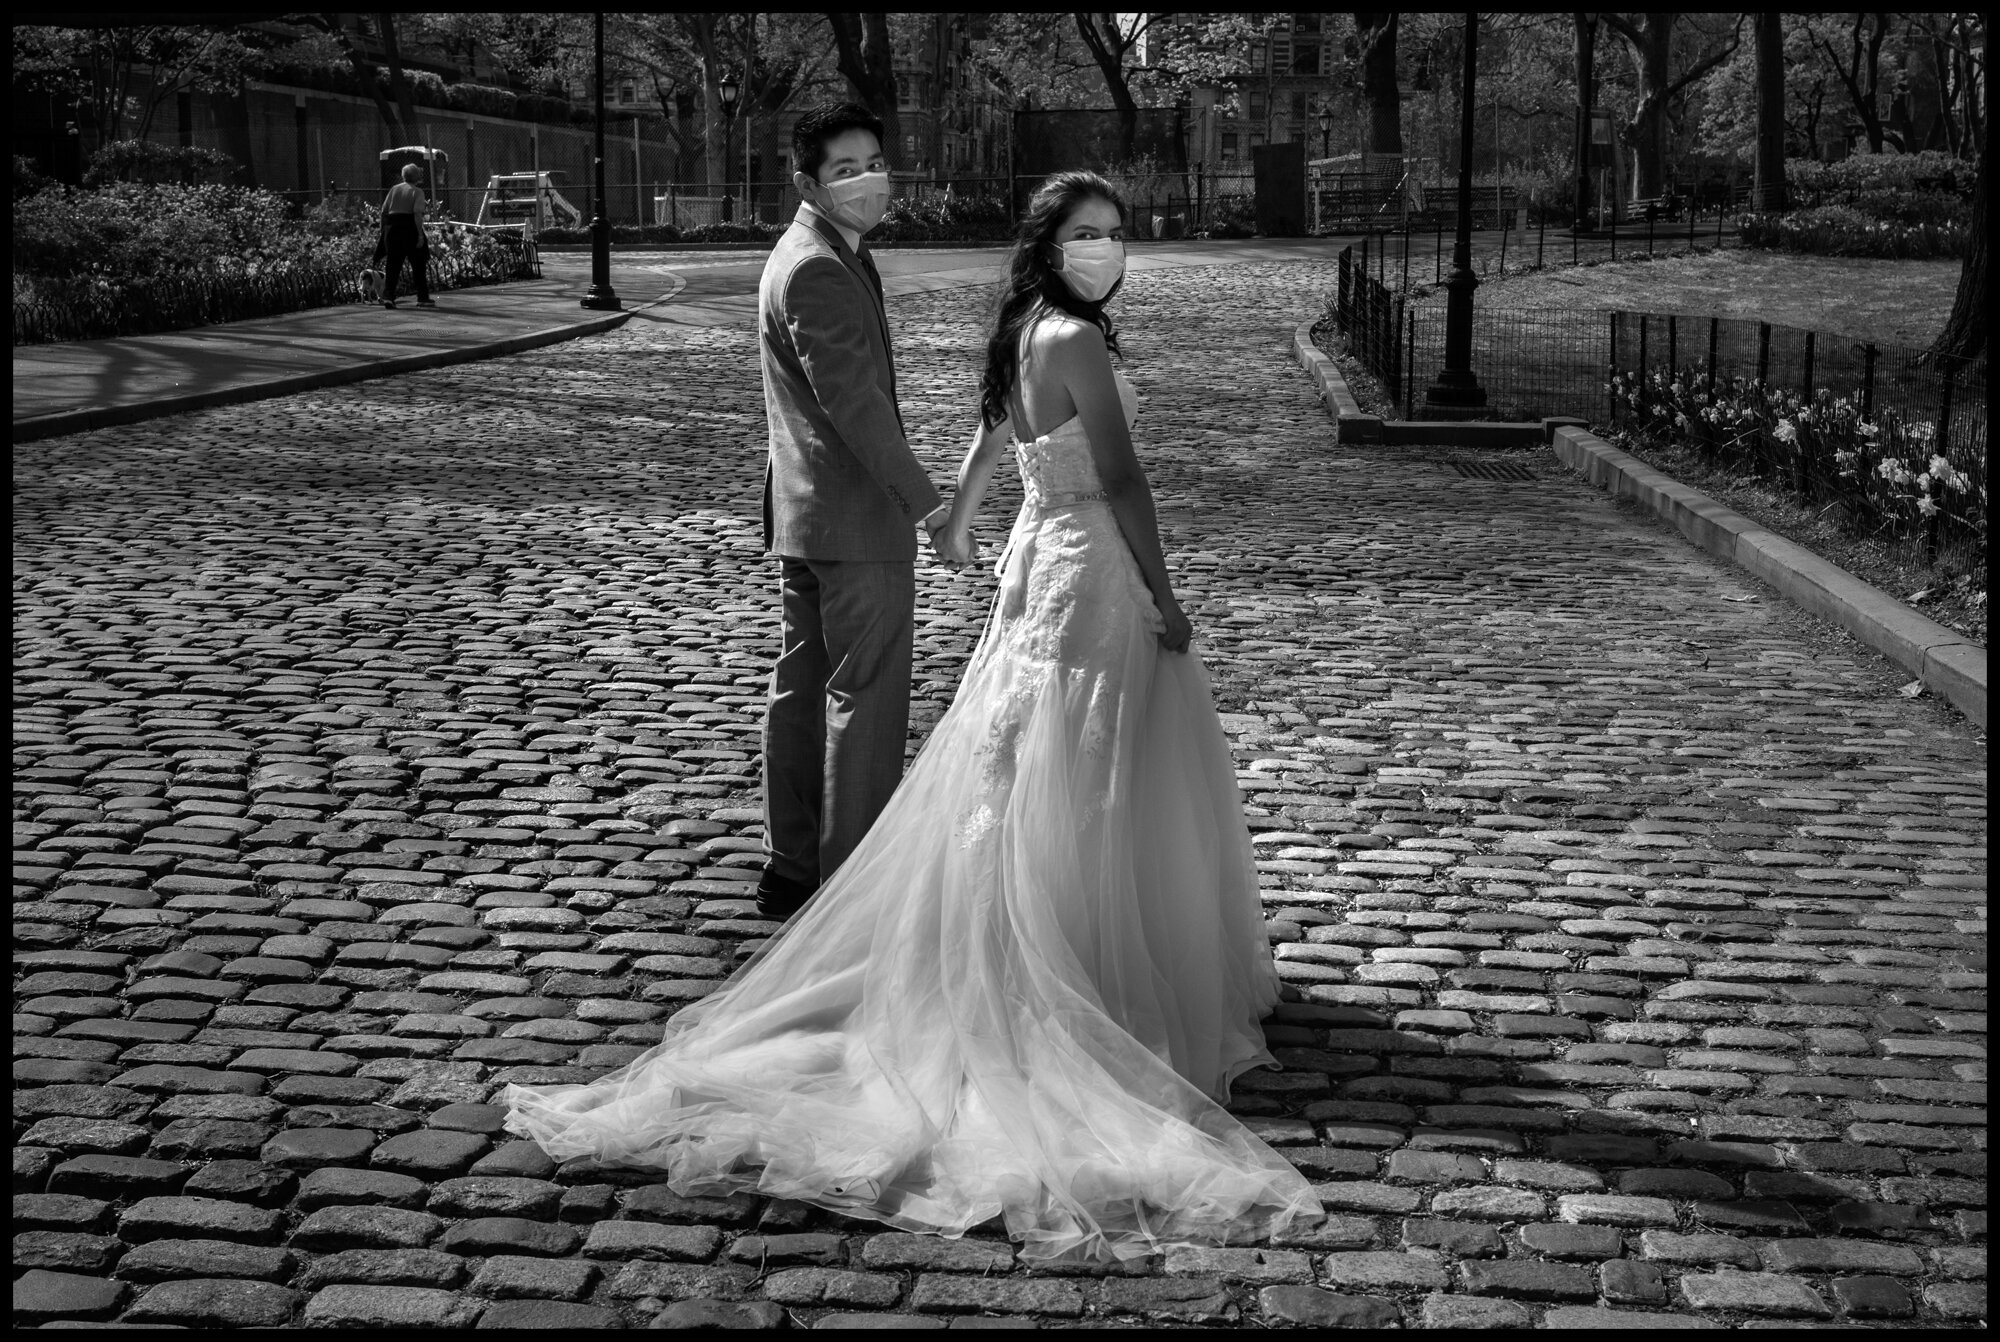  Daniel and Emily live in Brooklyn and they've been trying to plan a wedding for awhile. Daniel's parents immigrated to the US from Mexico and he was born in New York, and Emily immigrated to the US from Equador when she was a very young girl. They b